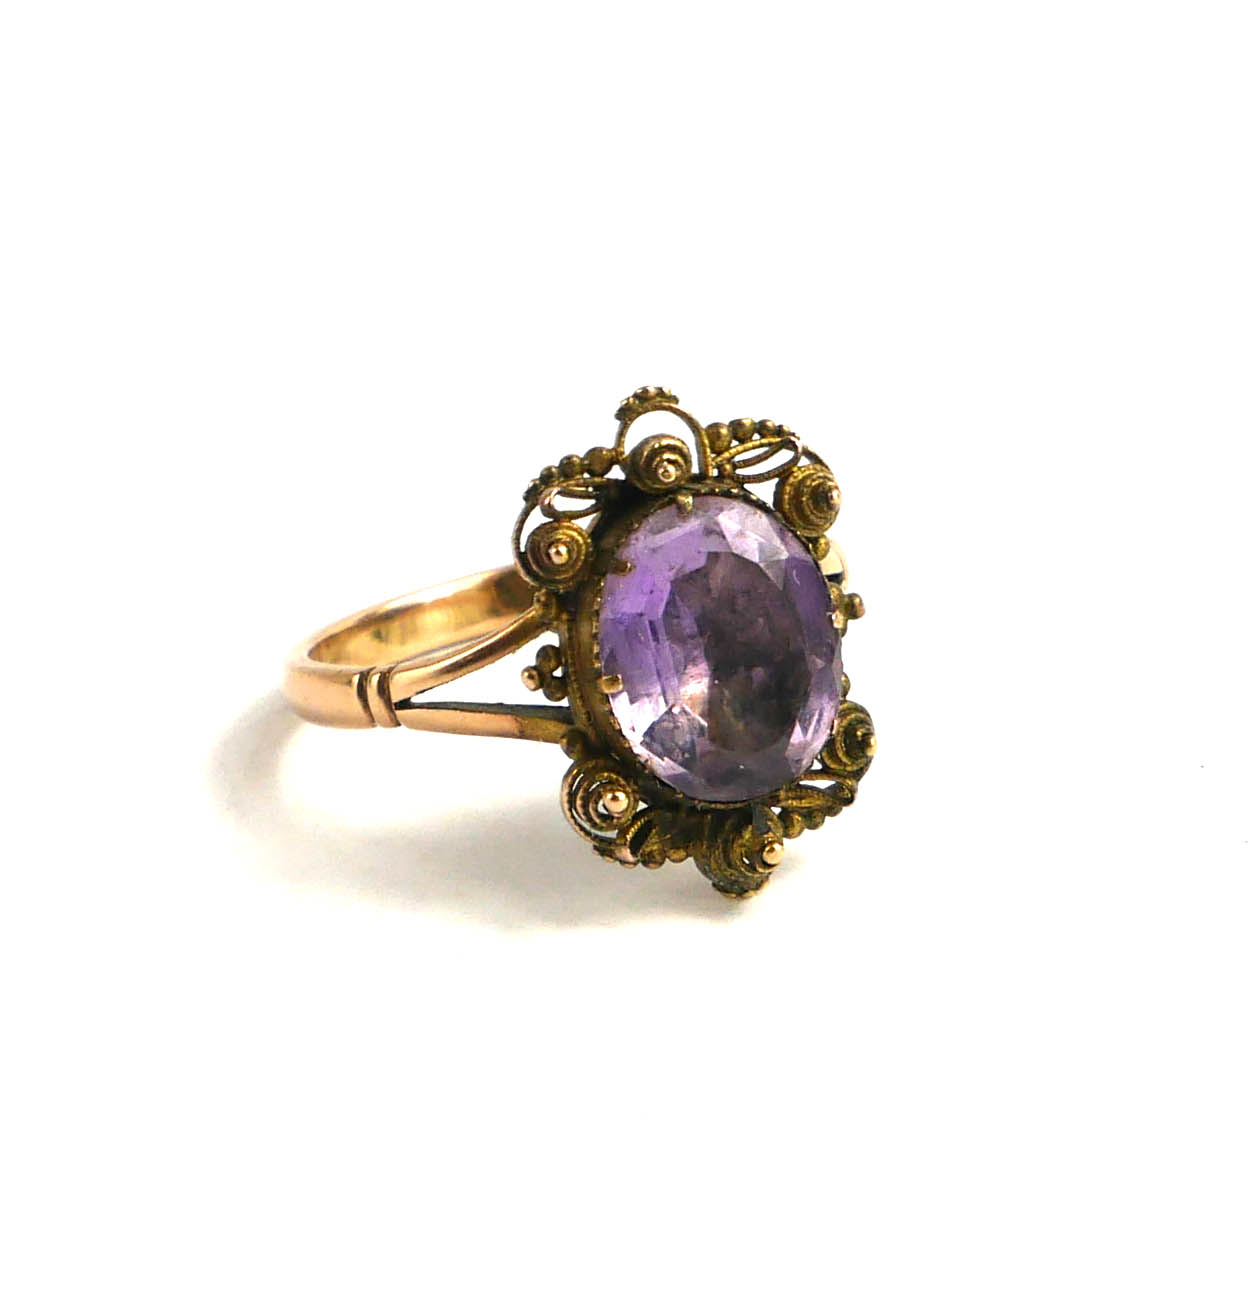 AN EARLY 20TH CENTURY YELLOW METAL AND AMETHYST RING The central oval cut stone set in a filigree